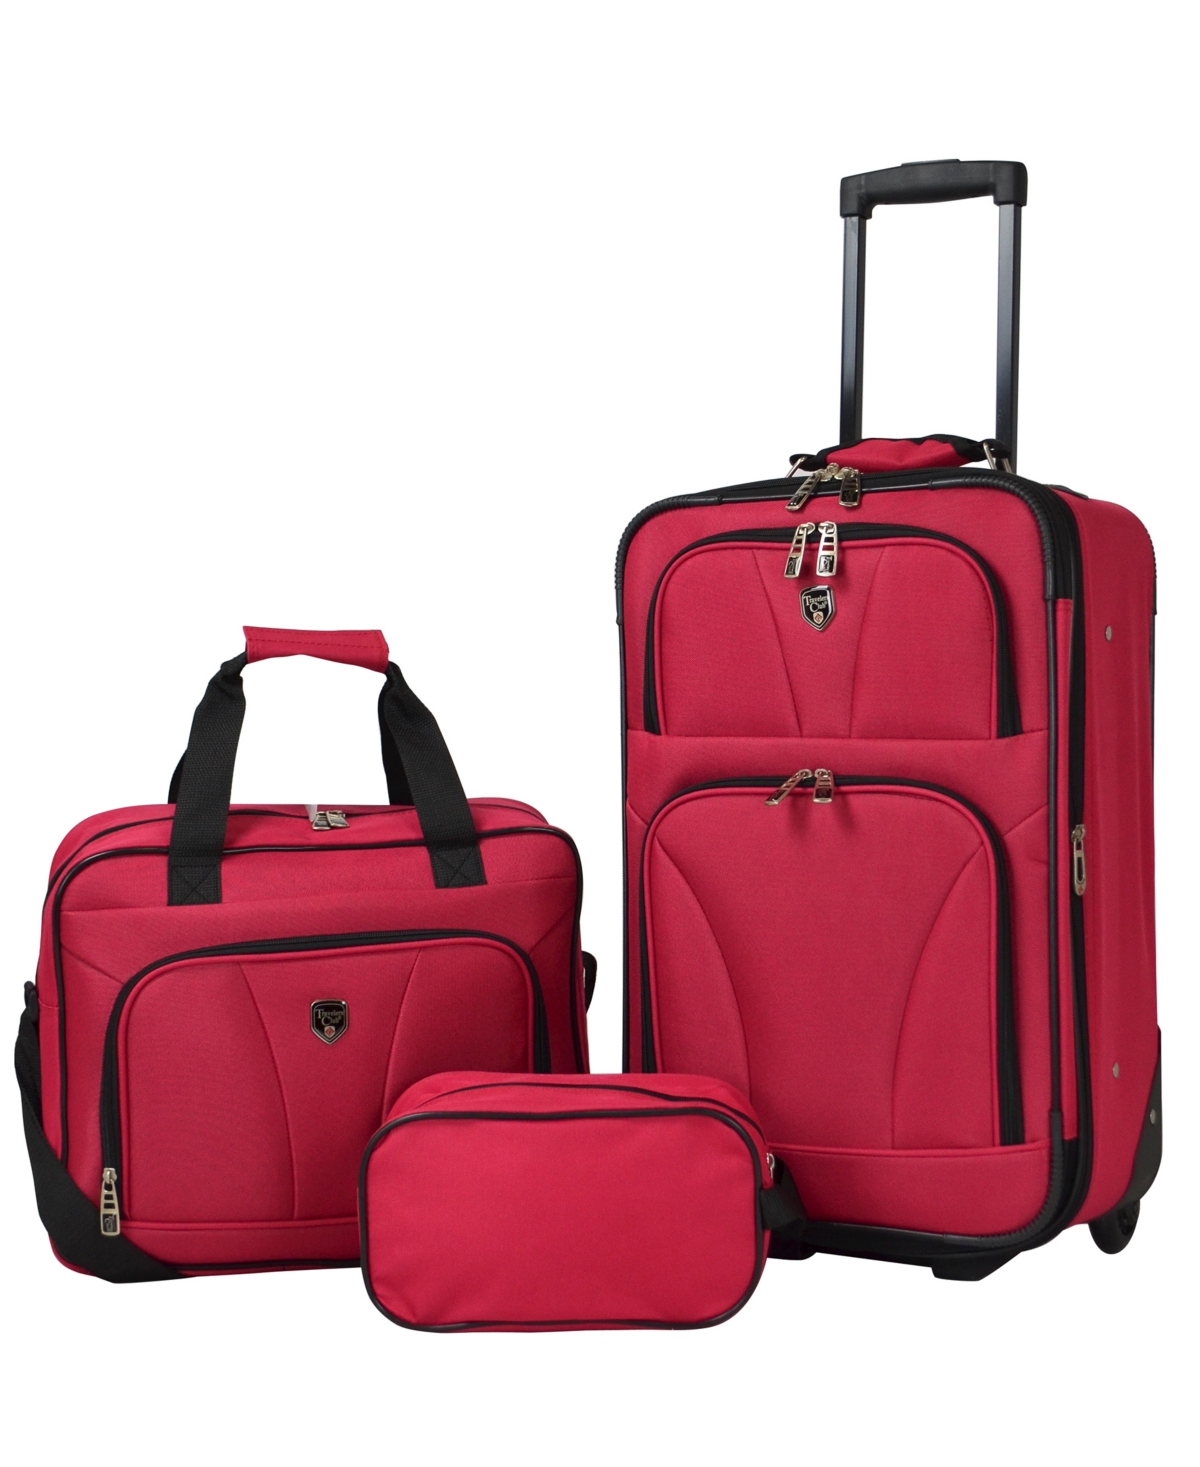 Travelers Club Bowman Eva Expandable Value Luggage And Travel Set, 3 Piece In Red